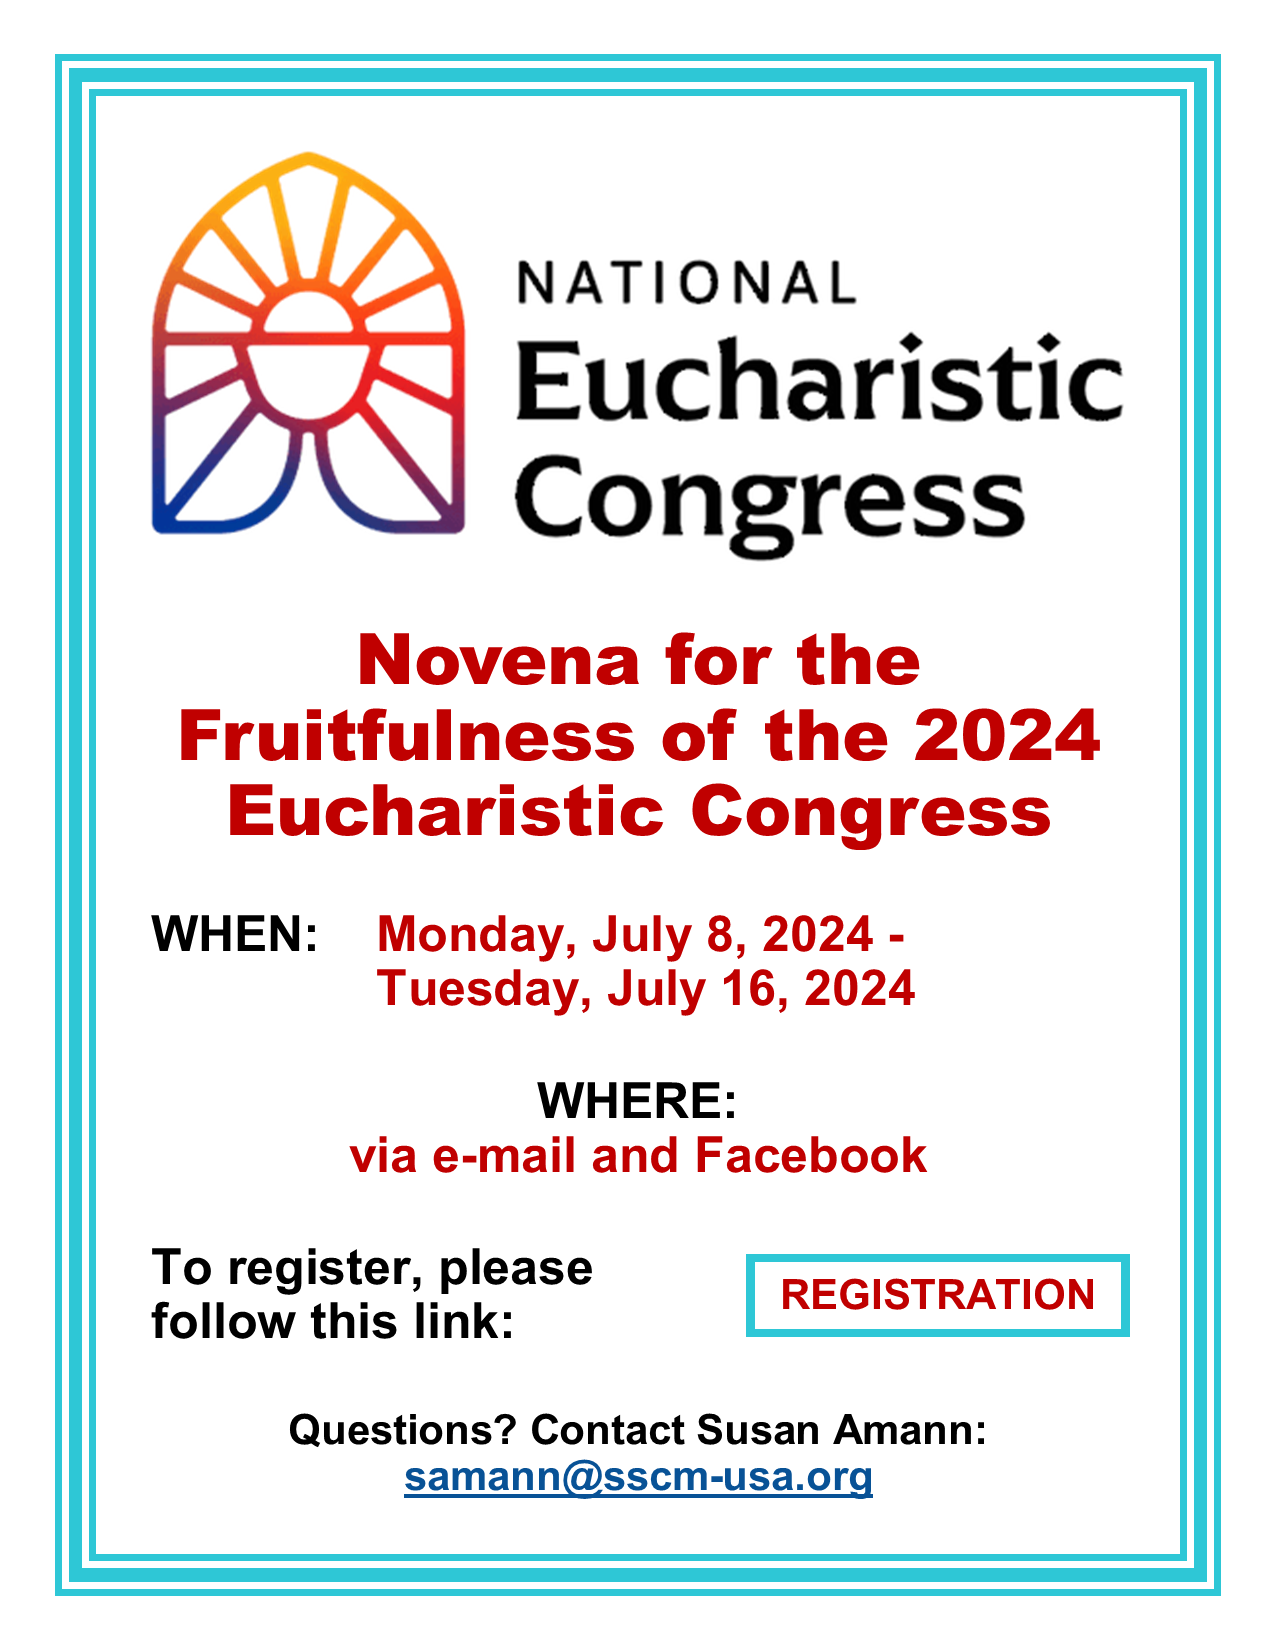 Novena for the Fruitfulness of the 2024 Eucharistic Congress: Click here to register